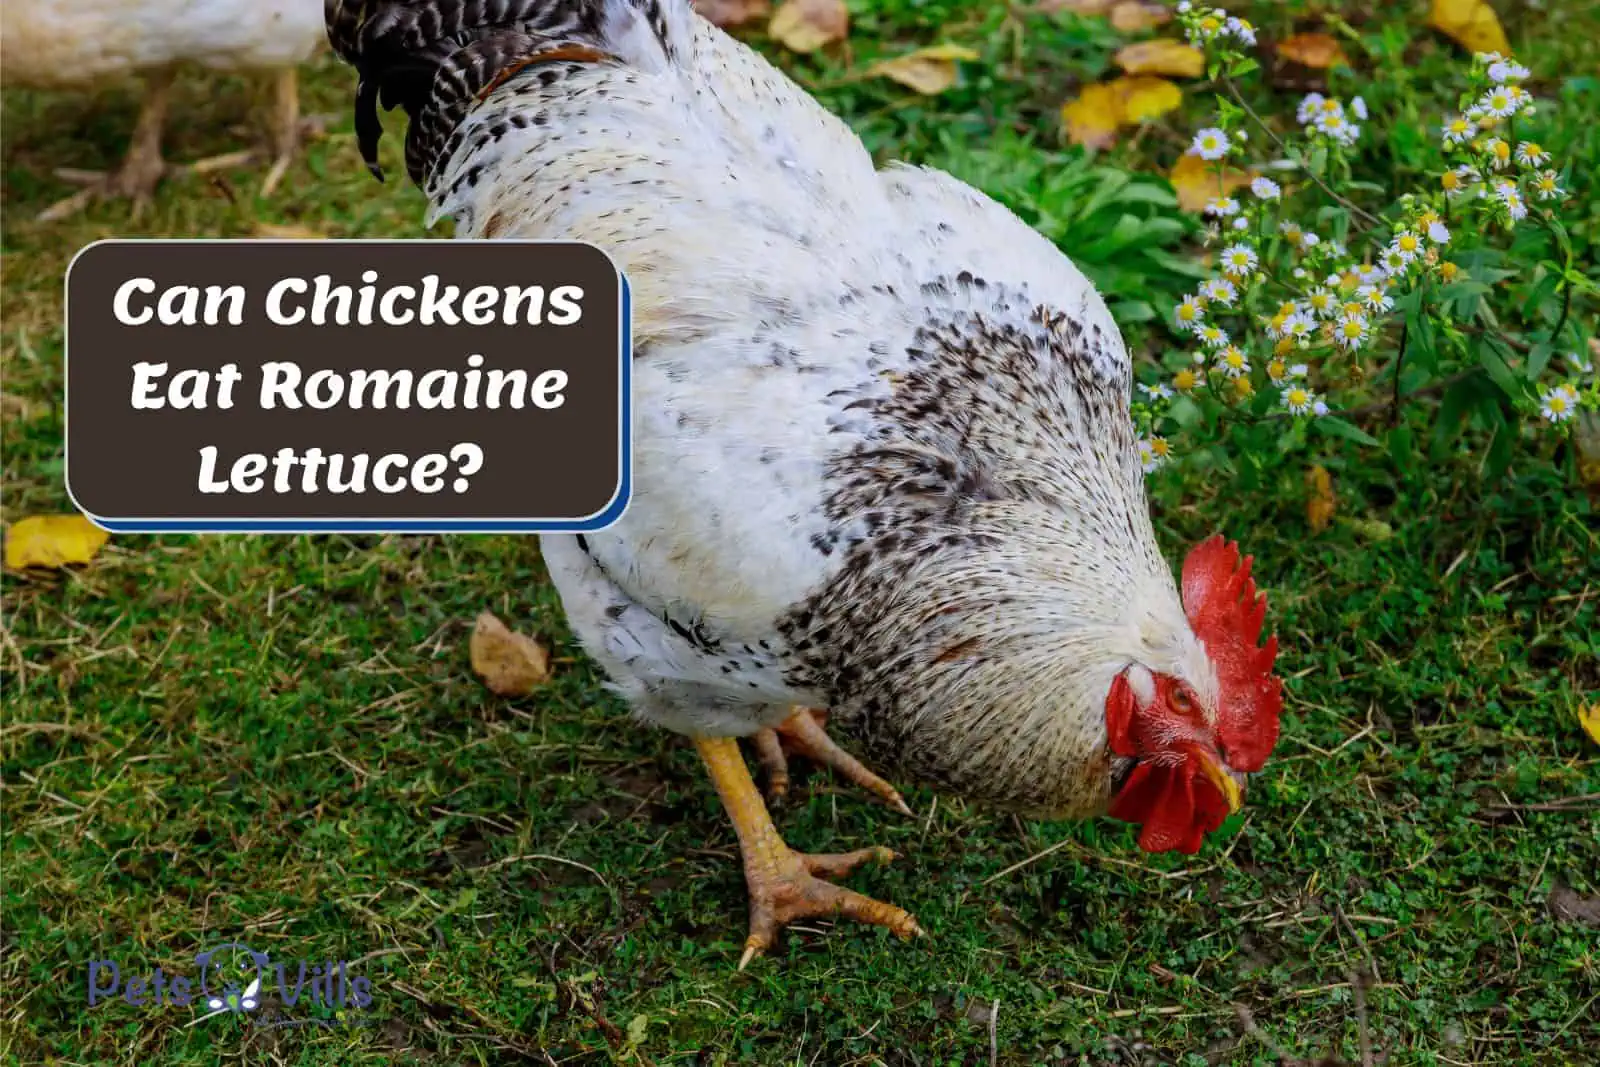 How to feed romaine lettuce to chickens